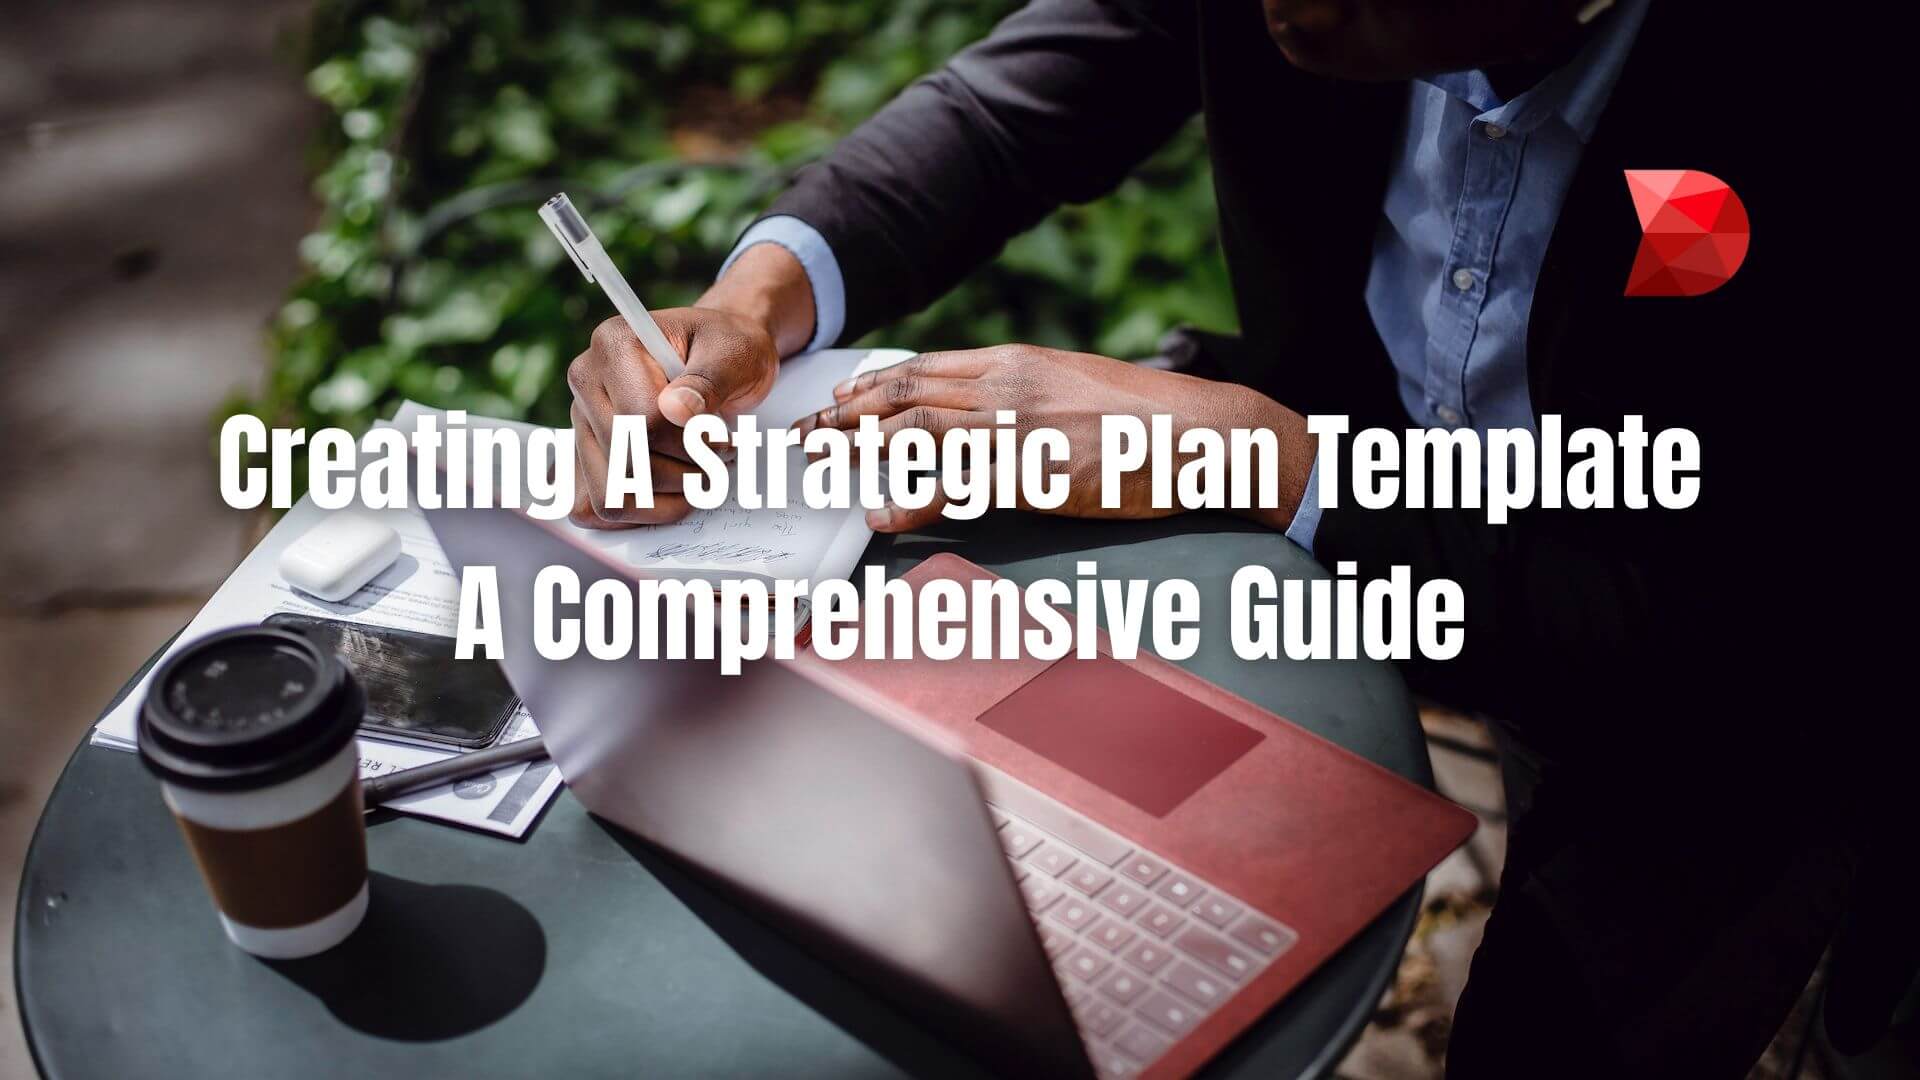 Strategic planning template is an observable tool that is used by all parties connected with the planning process. Here's how to create one!